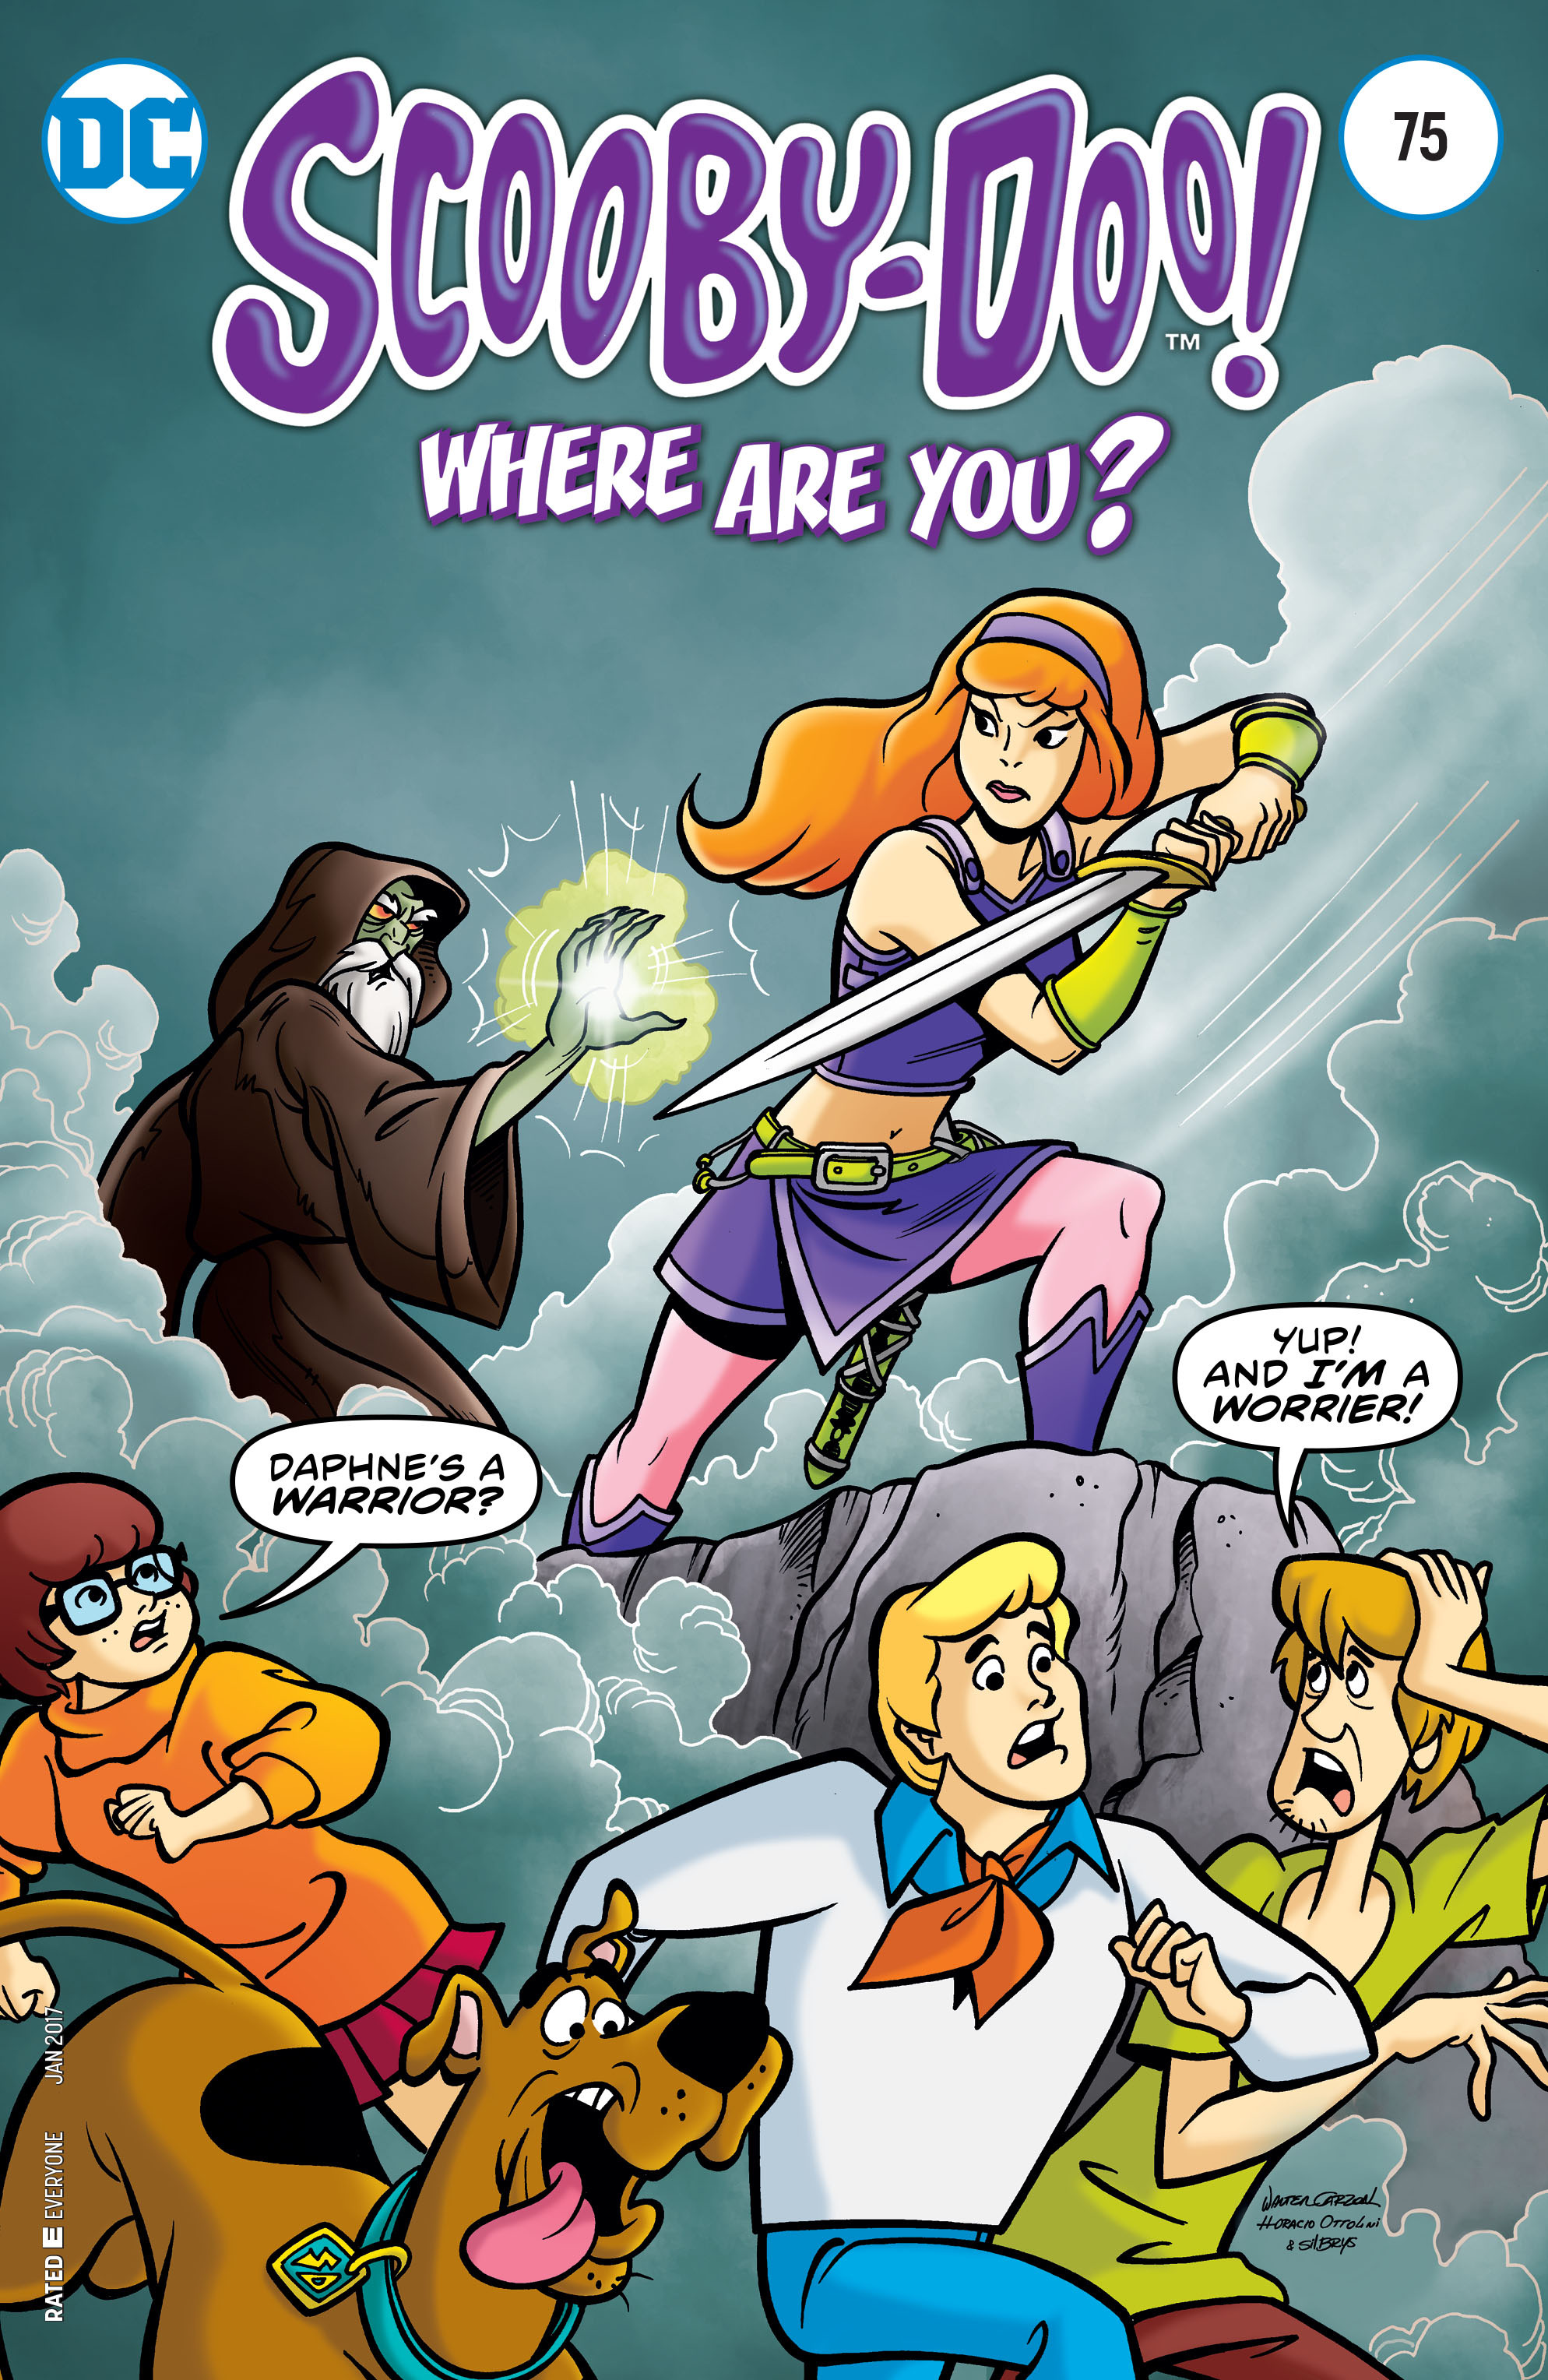 Read online Scooby-Doo: Where Are You? comic -  Issue #75 - 1